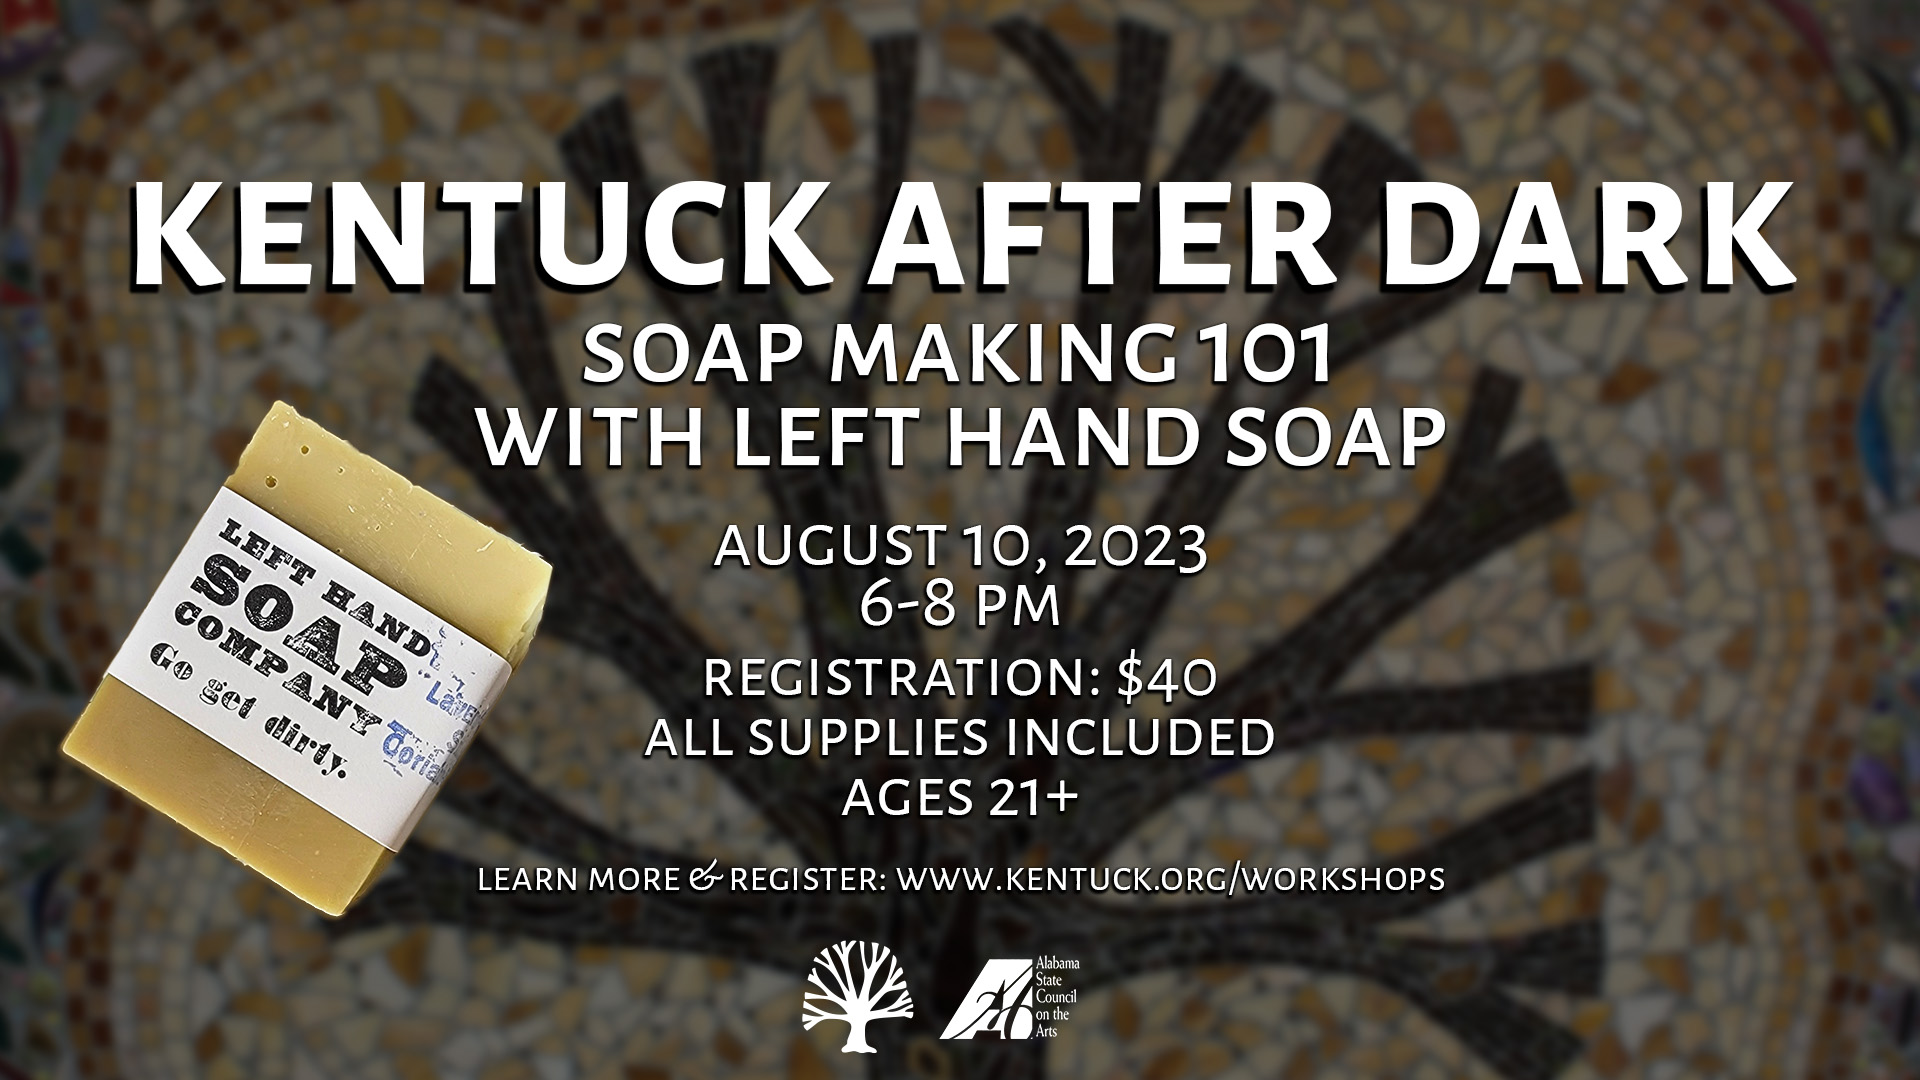 Kentuck After Dark: Soap Making 101 with Left Hand Soap cover image